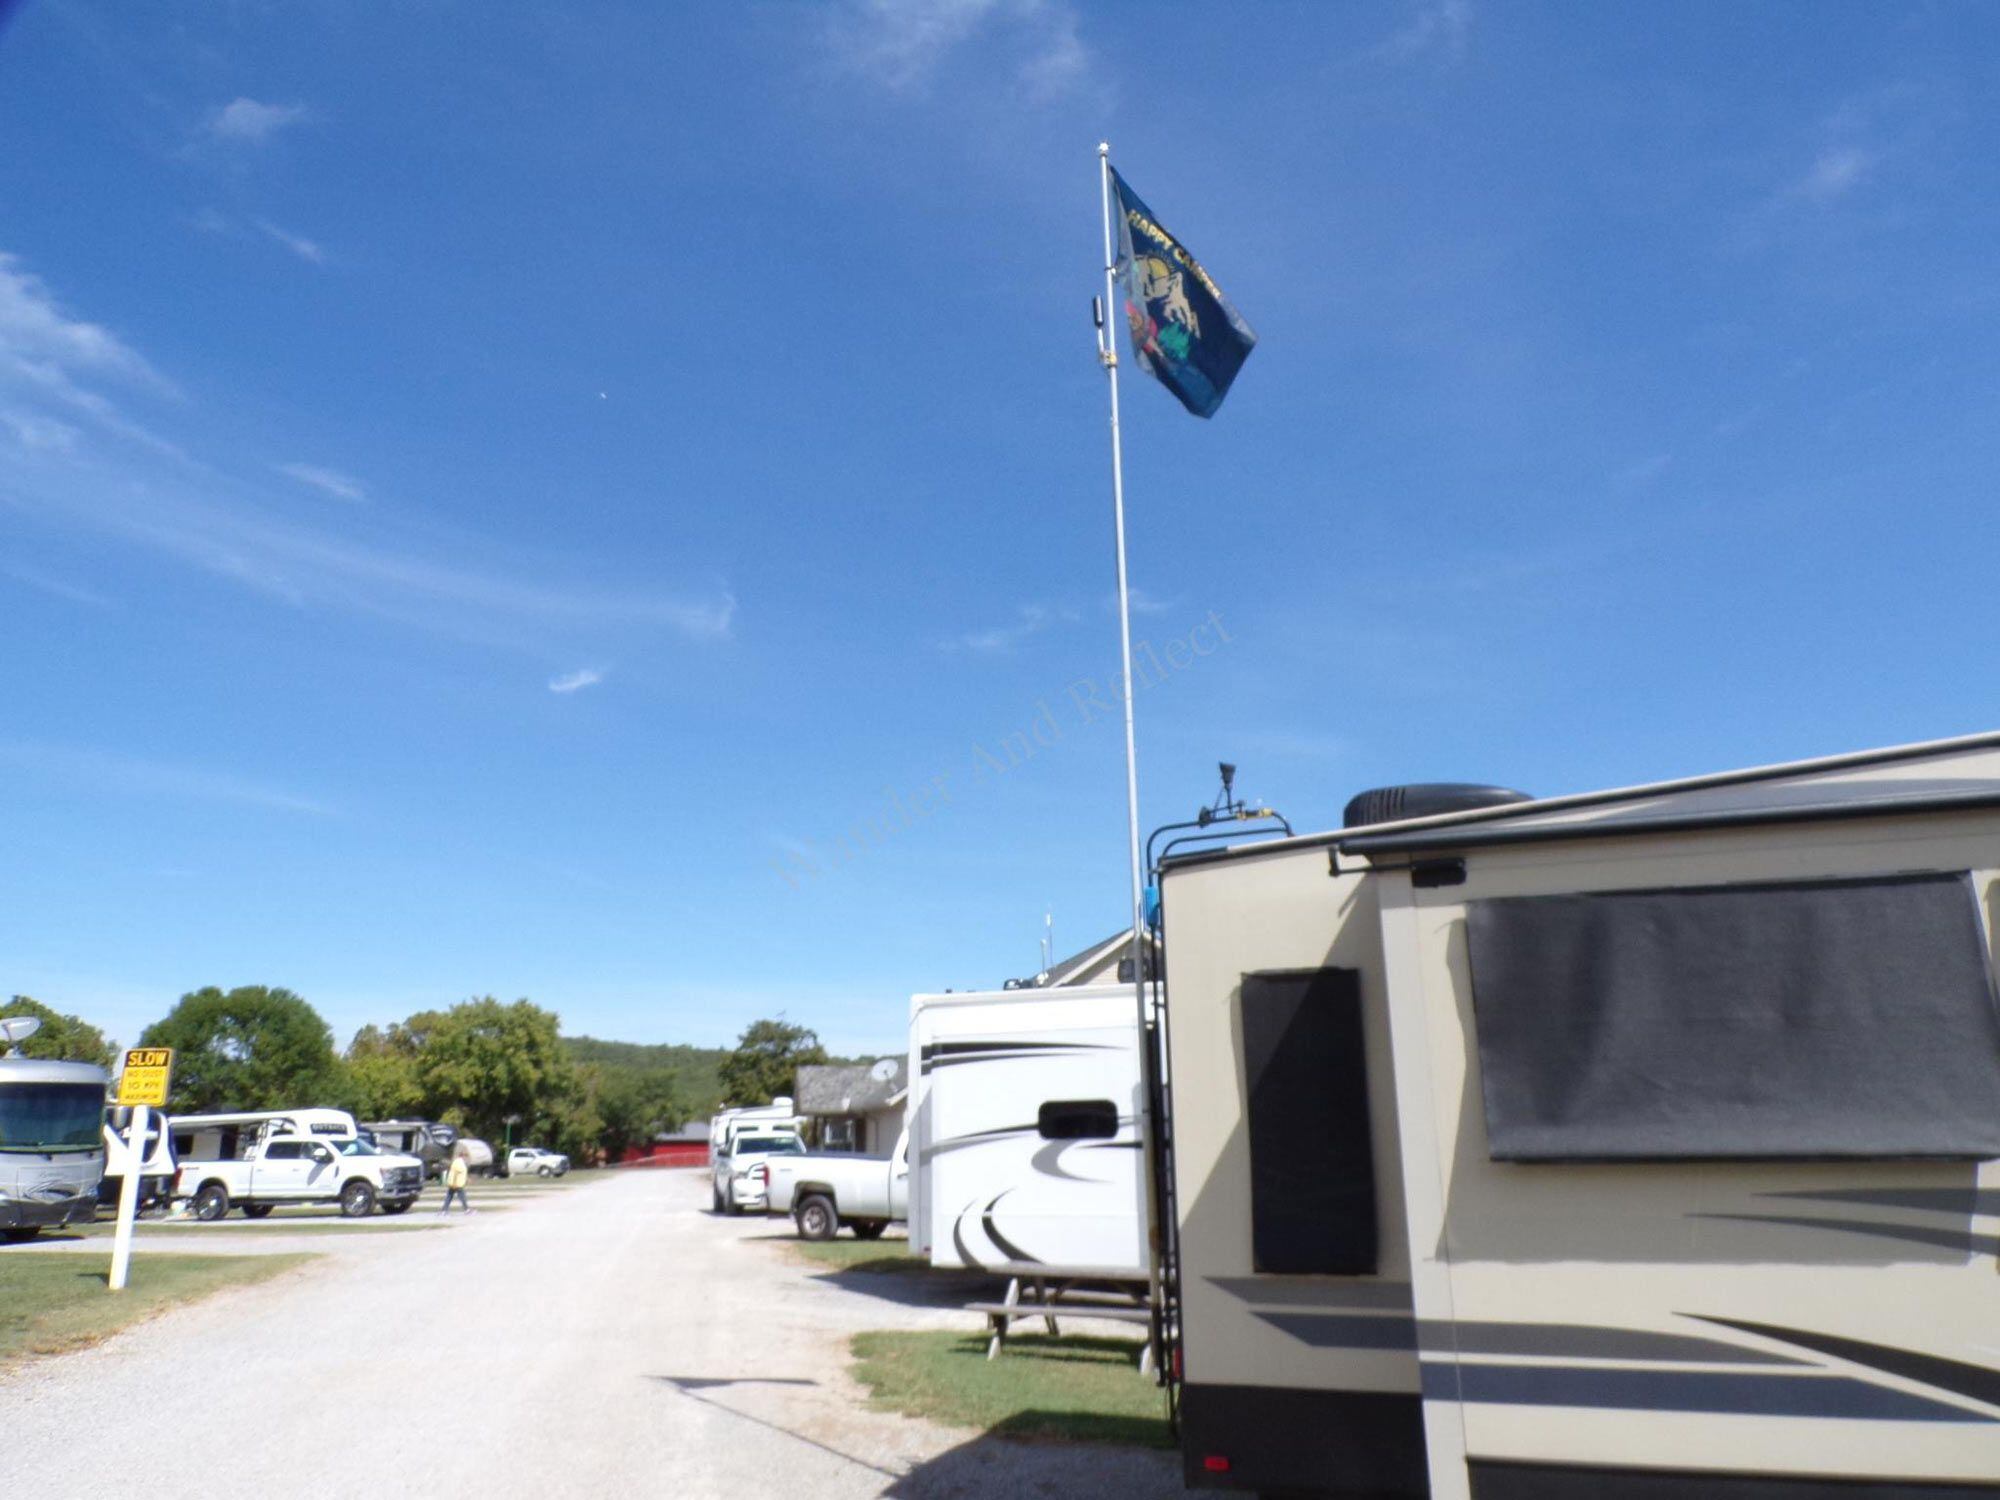 Options like telescoping flagpoles make for ideal base-camp antenna mounts.